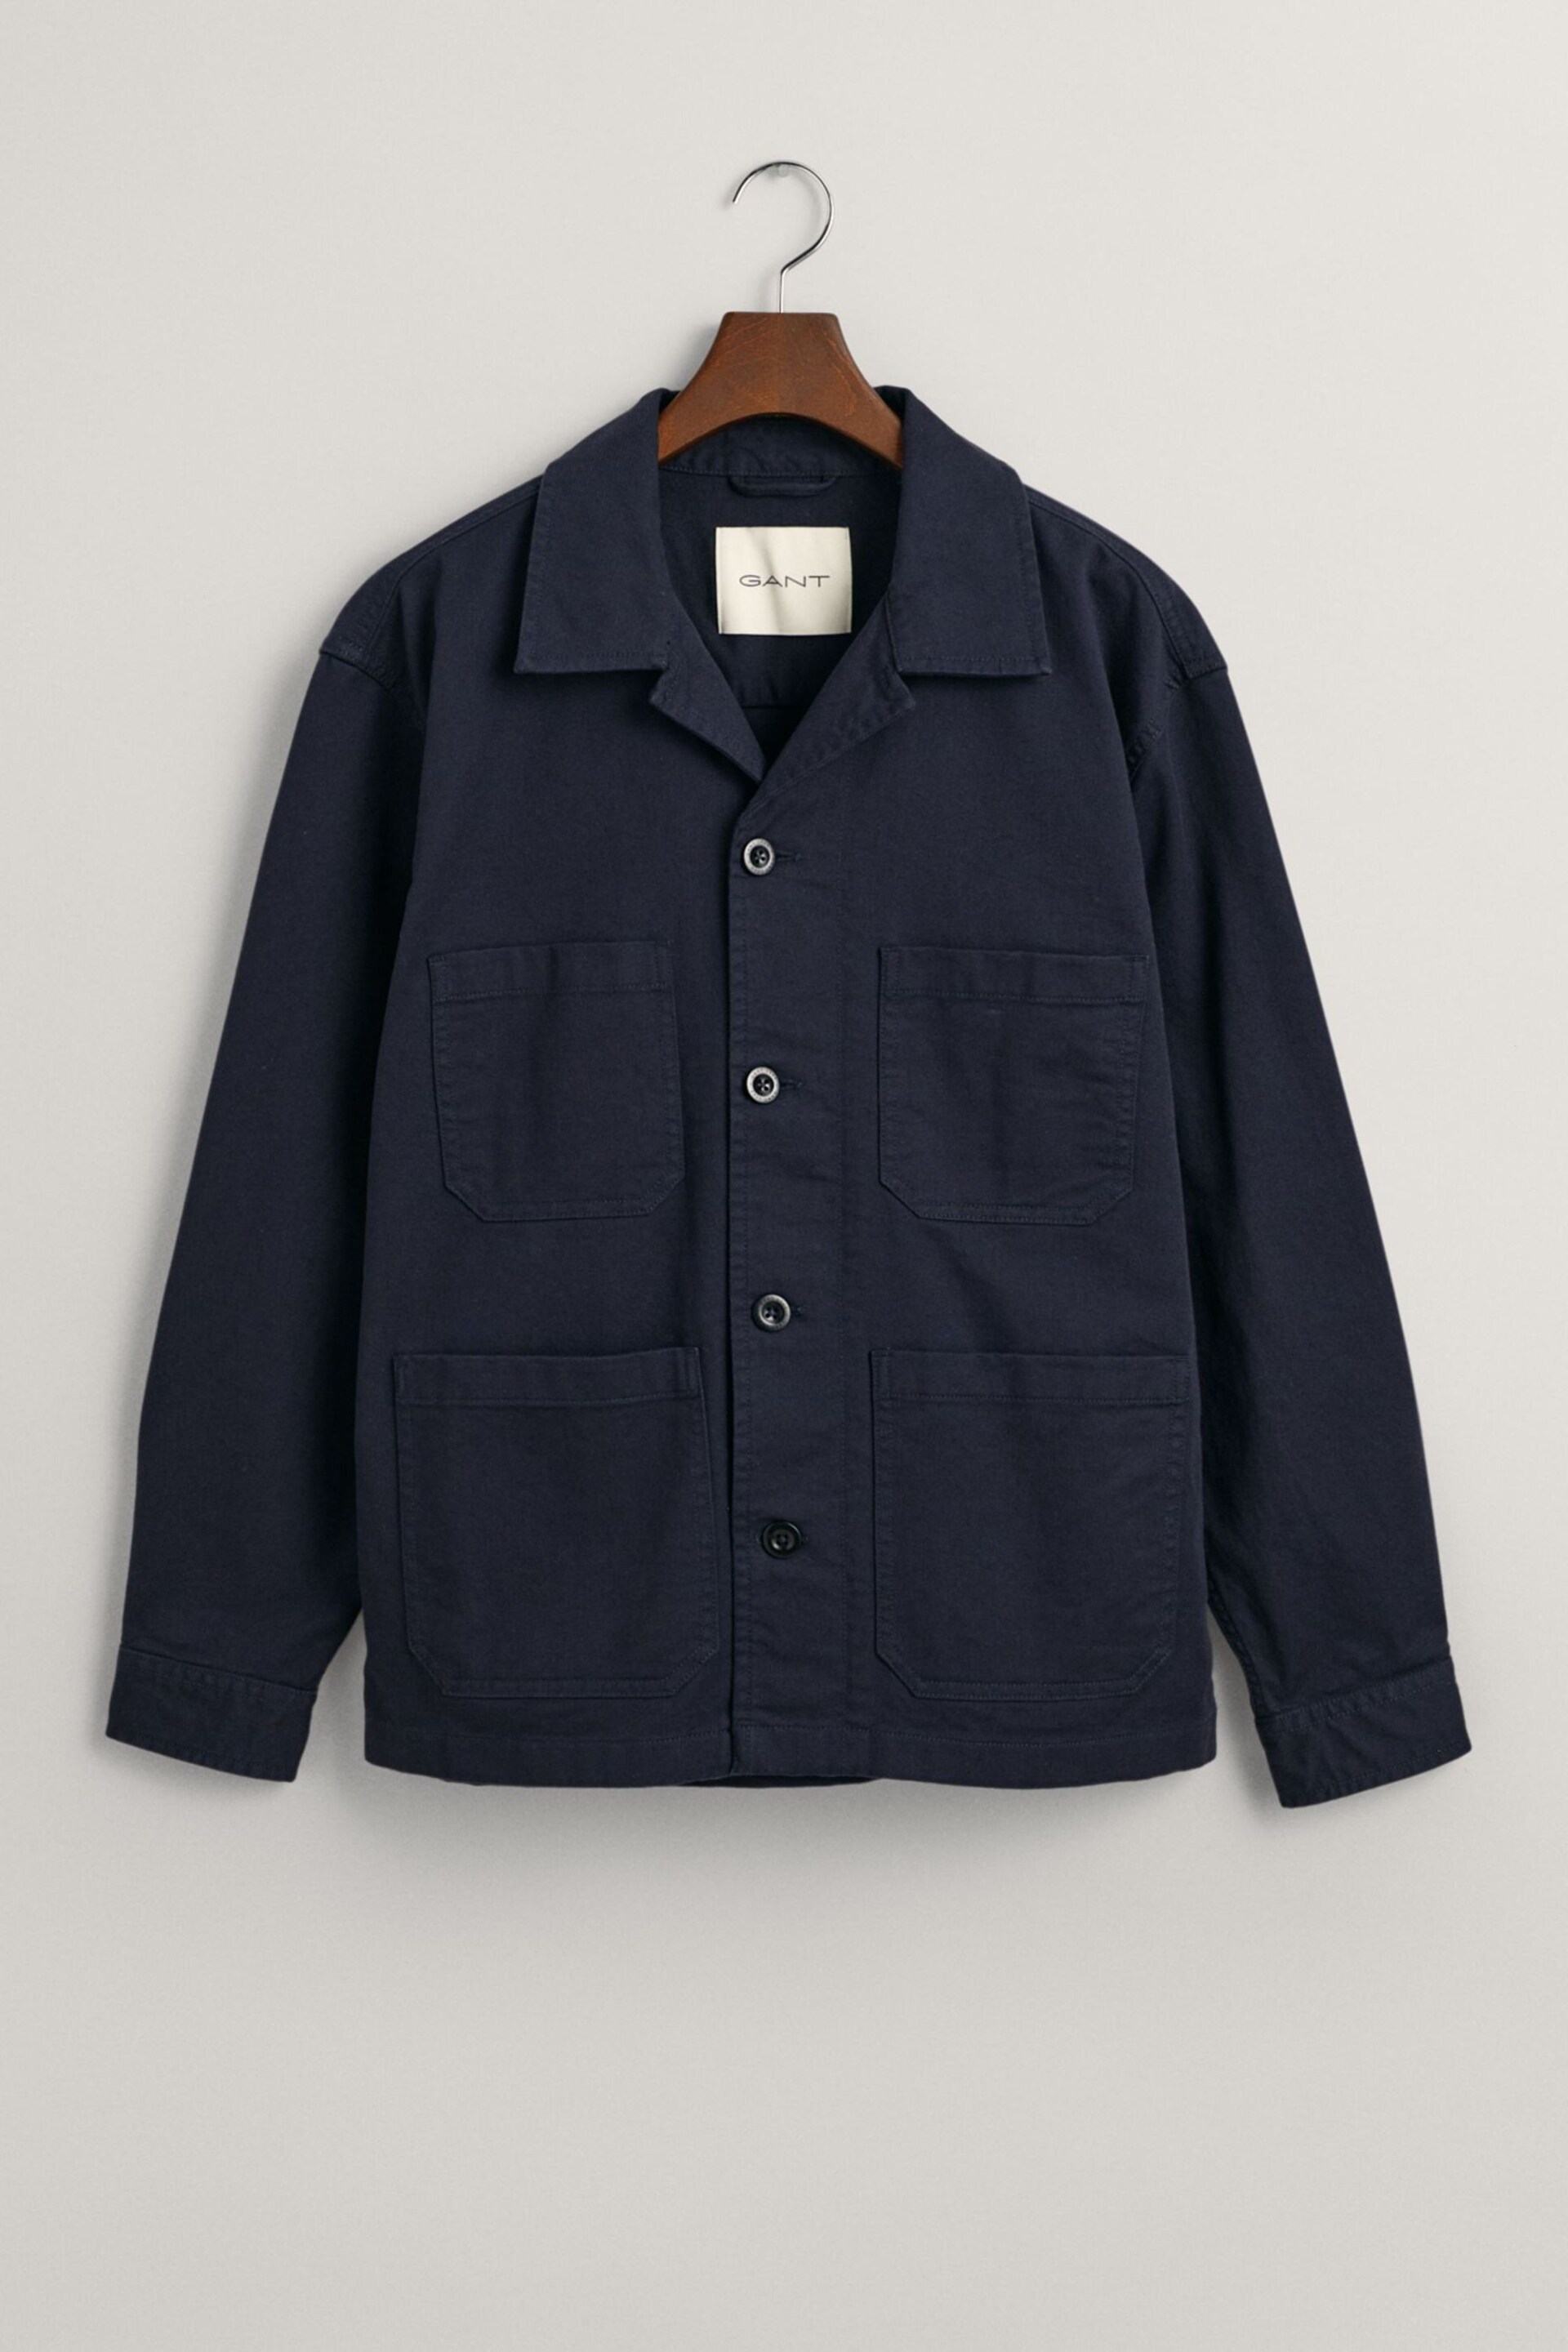 GANT Relaxed Fit Cotton Linen Twill Overshirt - Image 7 of 7